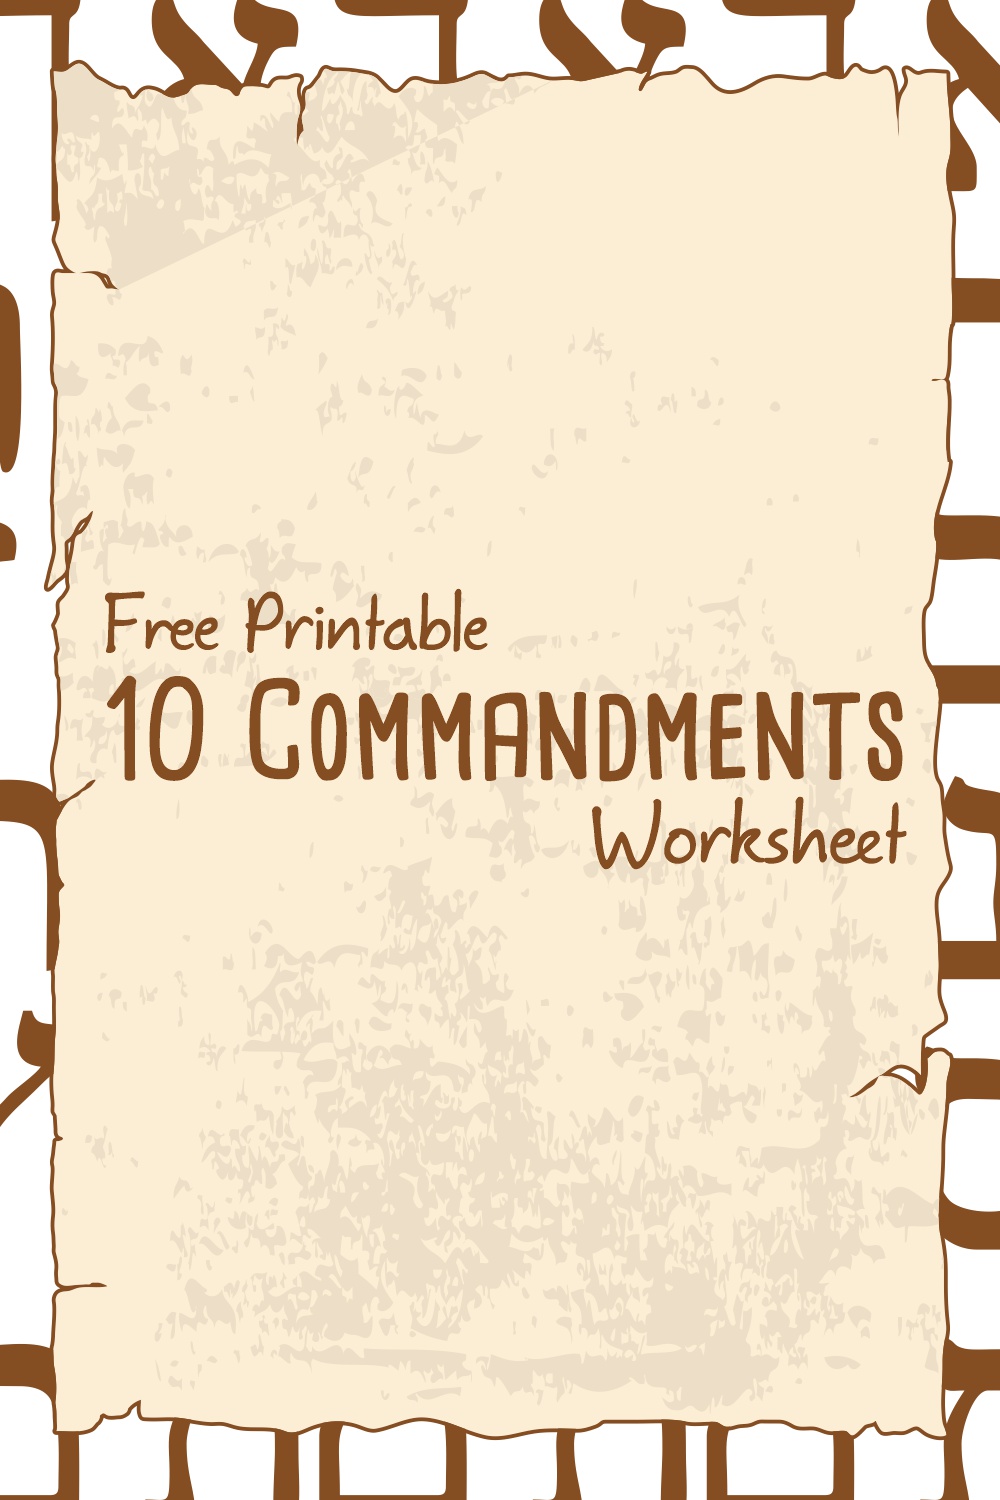 15 Images of  Printable 10 Commandments Worksheets